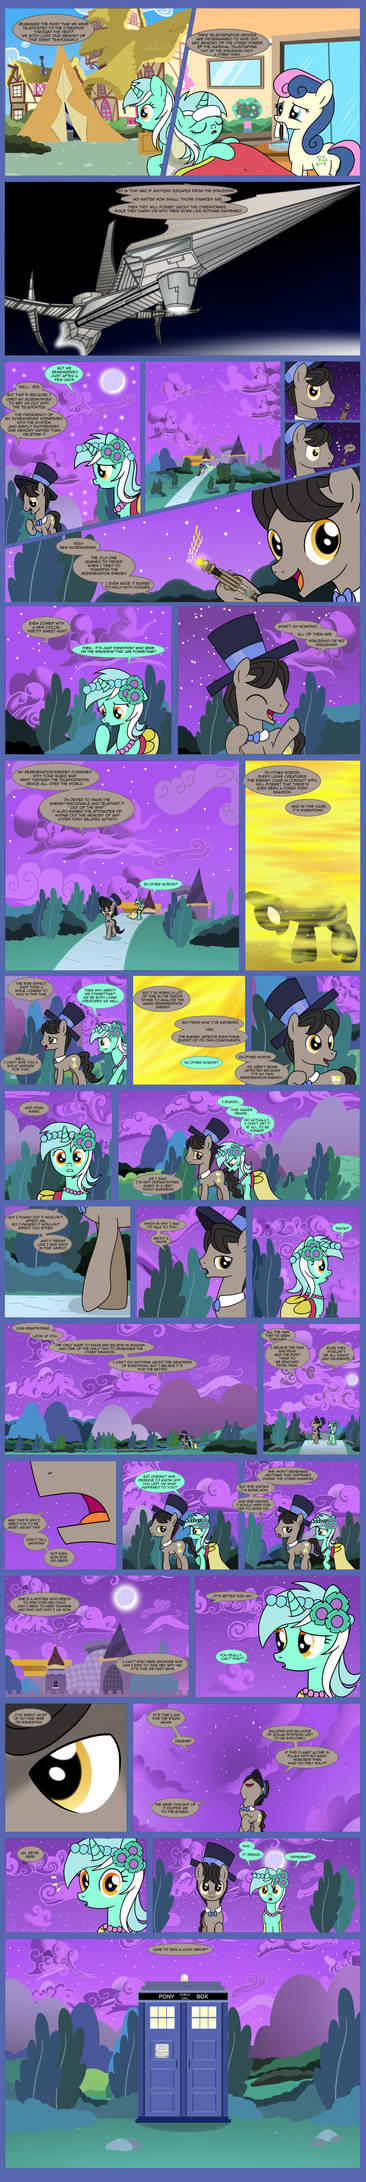 Doctor Whooves - Epilogue Pt 4